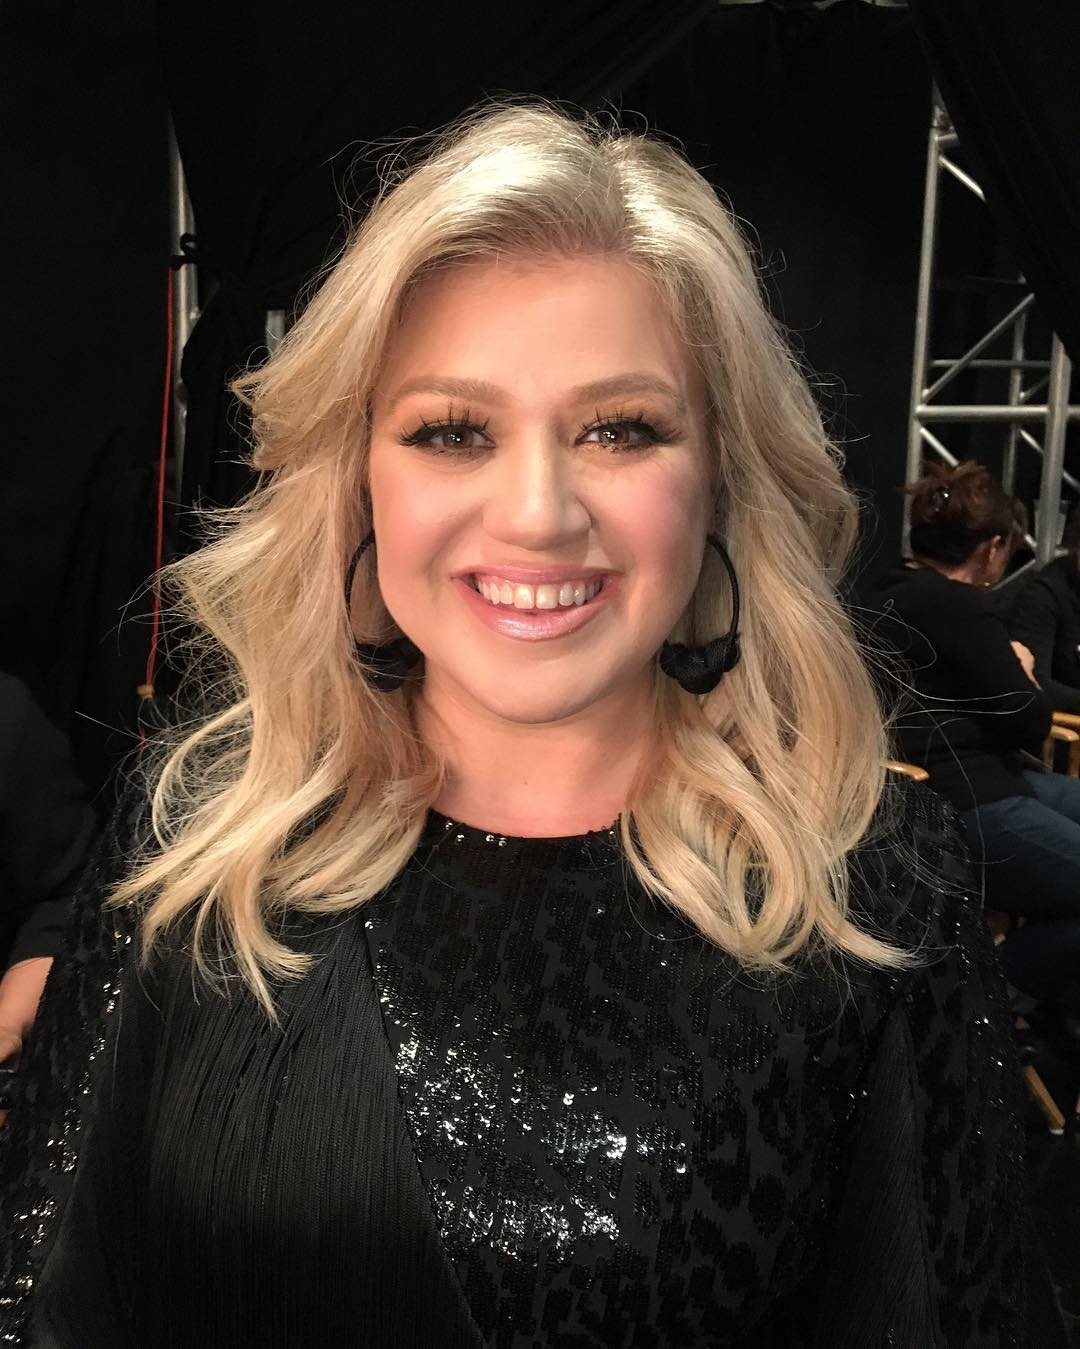 Get Kelly Clarkson's Glam Look from 